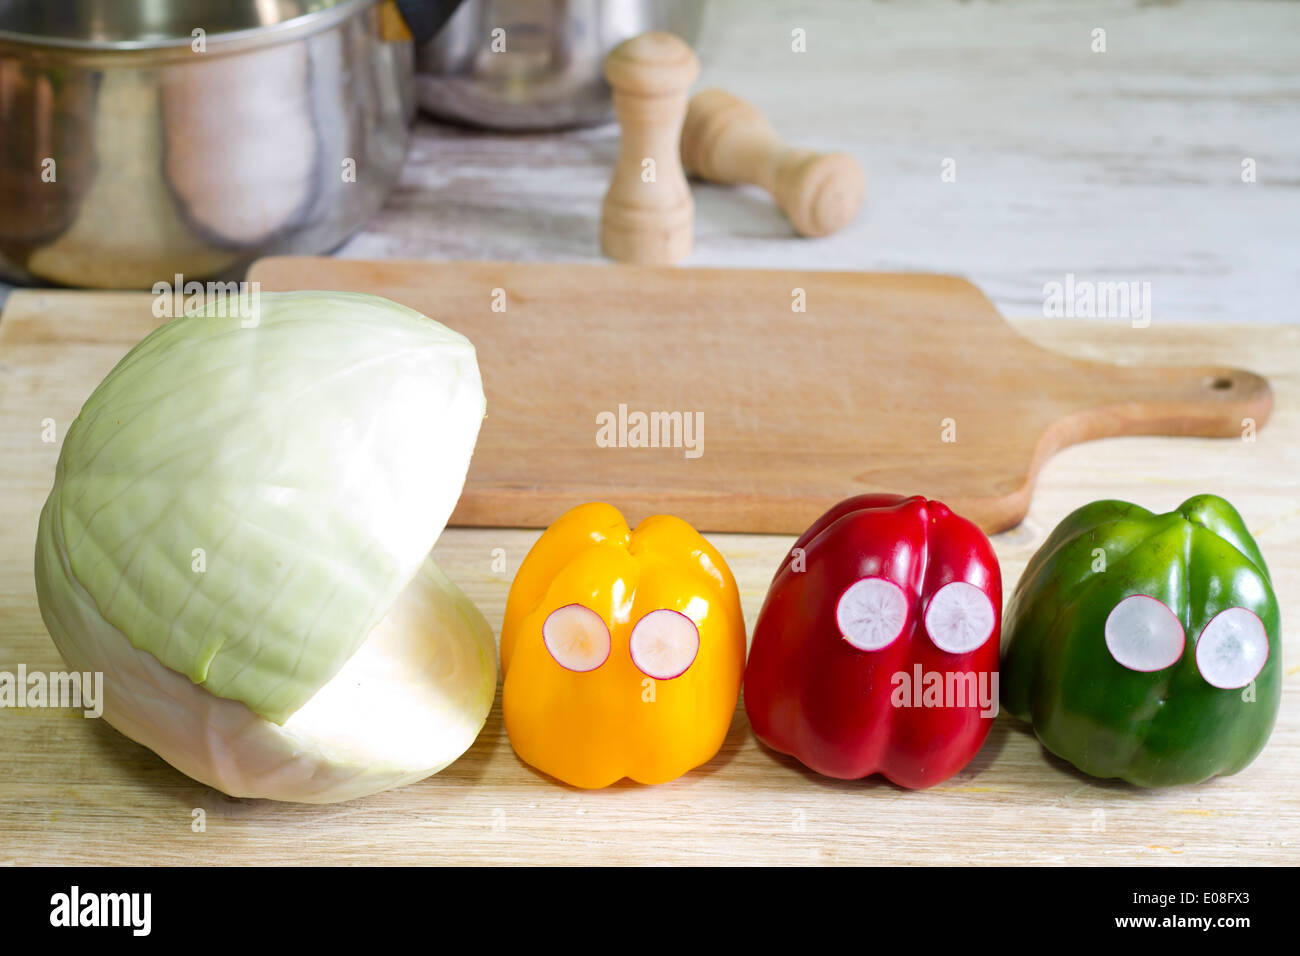 Abstract food creative concept with cabbage and peppers in the kitchen Stock Photo